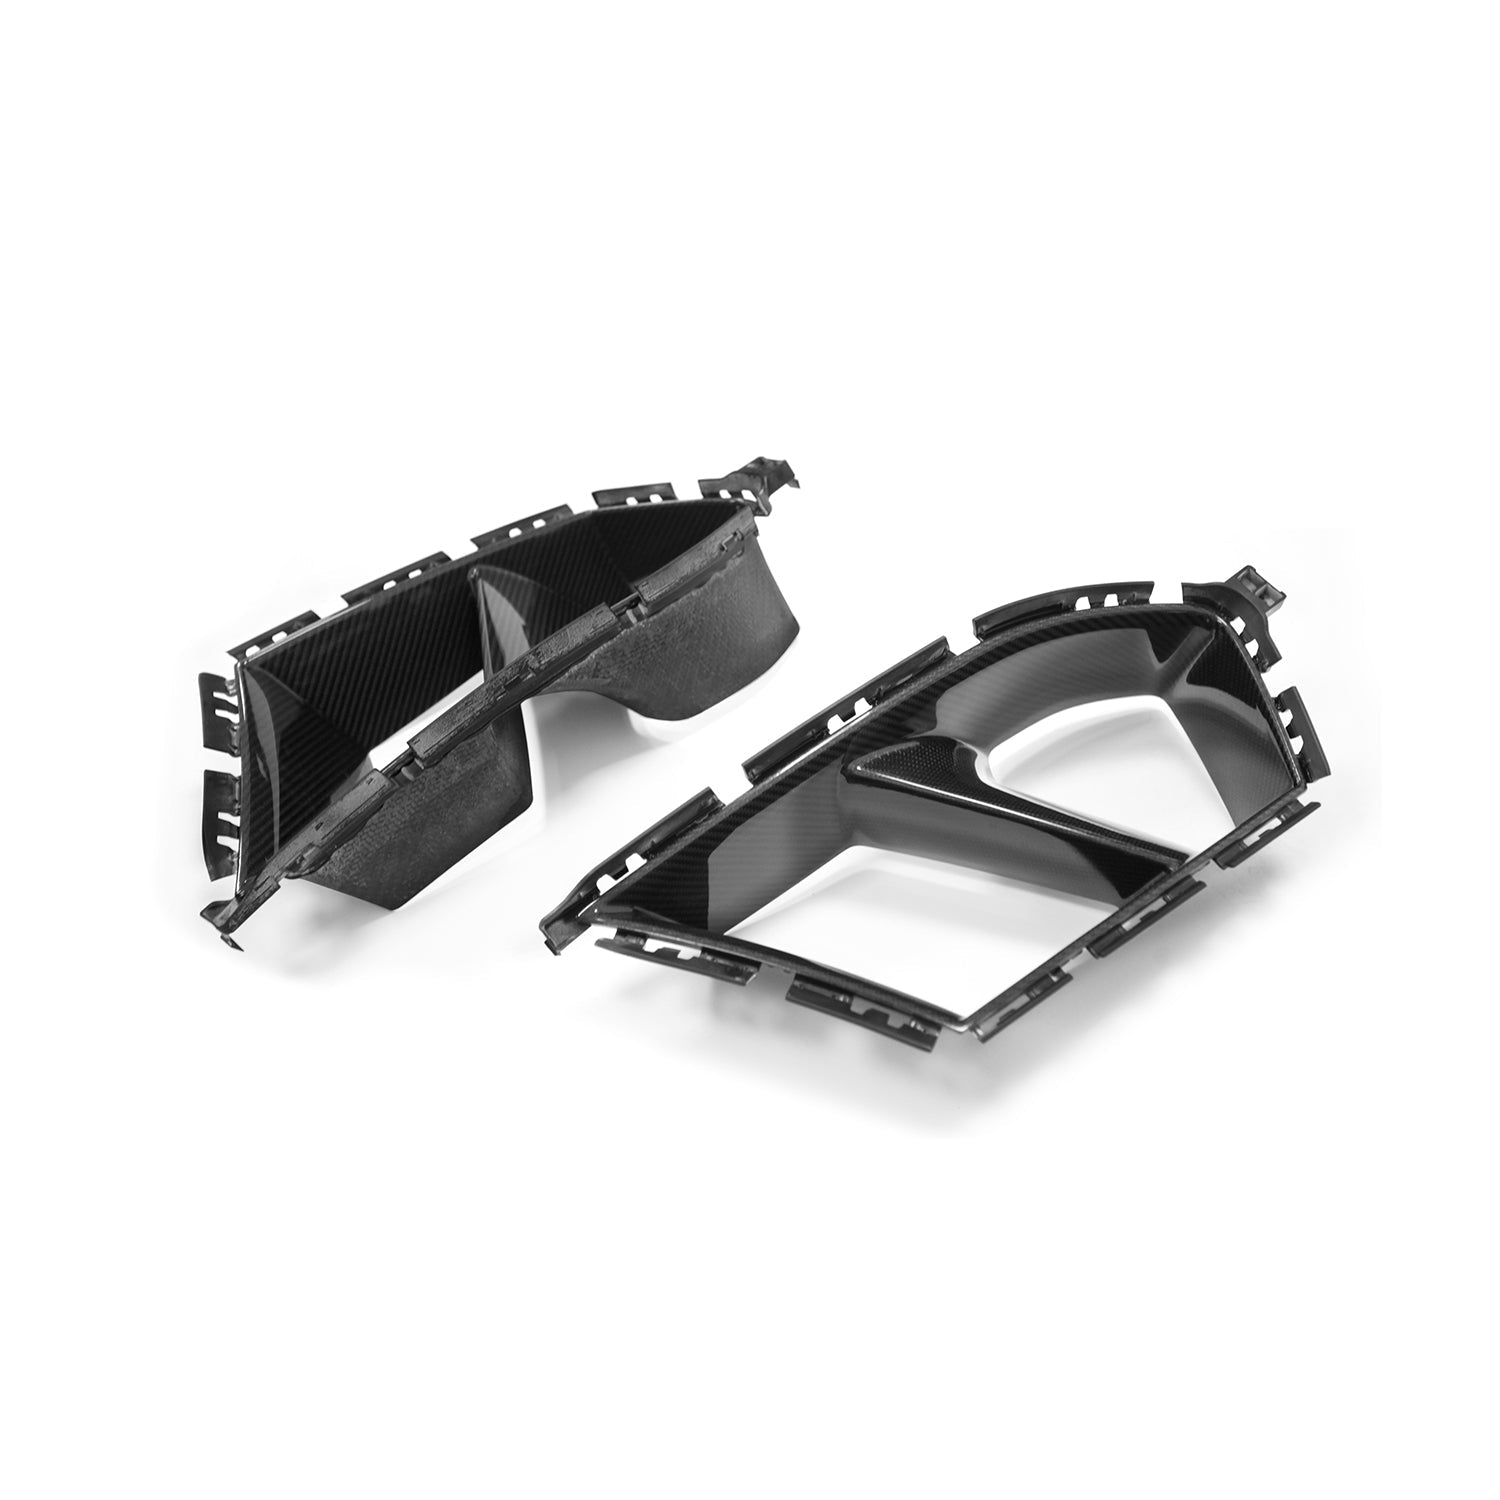 MHC+ BMW G80 G81 M3 G82 G83 M4 Performance Style Front Ducts In Pre Preg Carbon Fibre